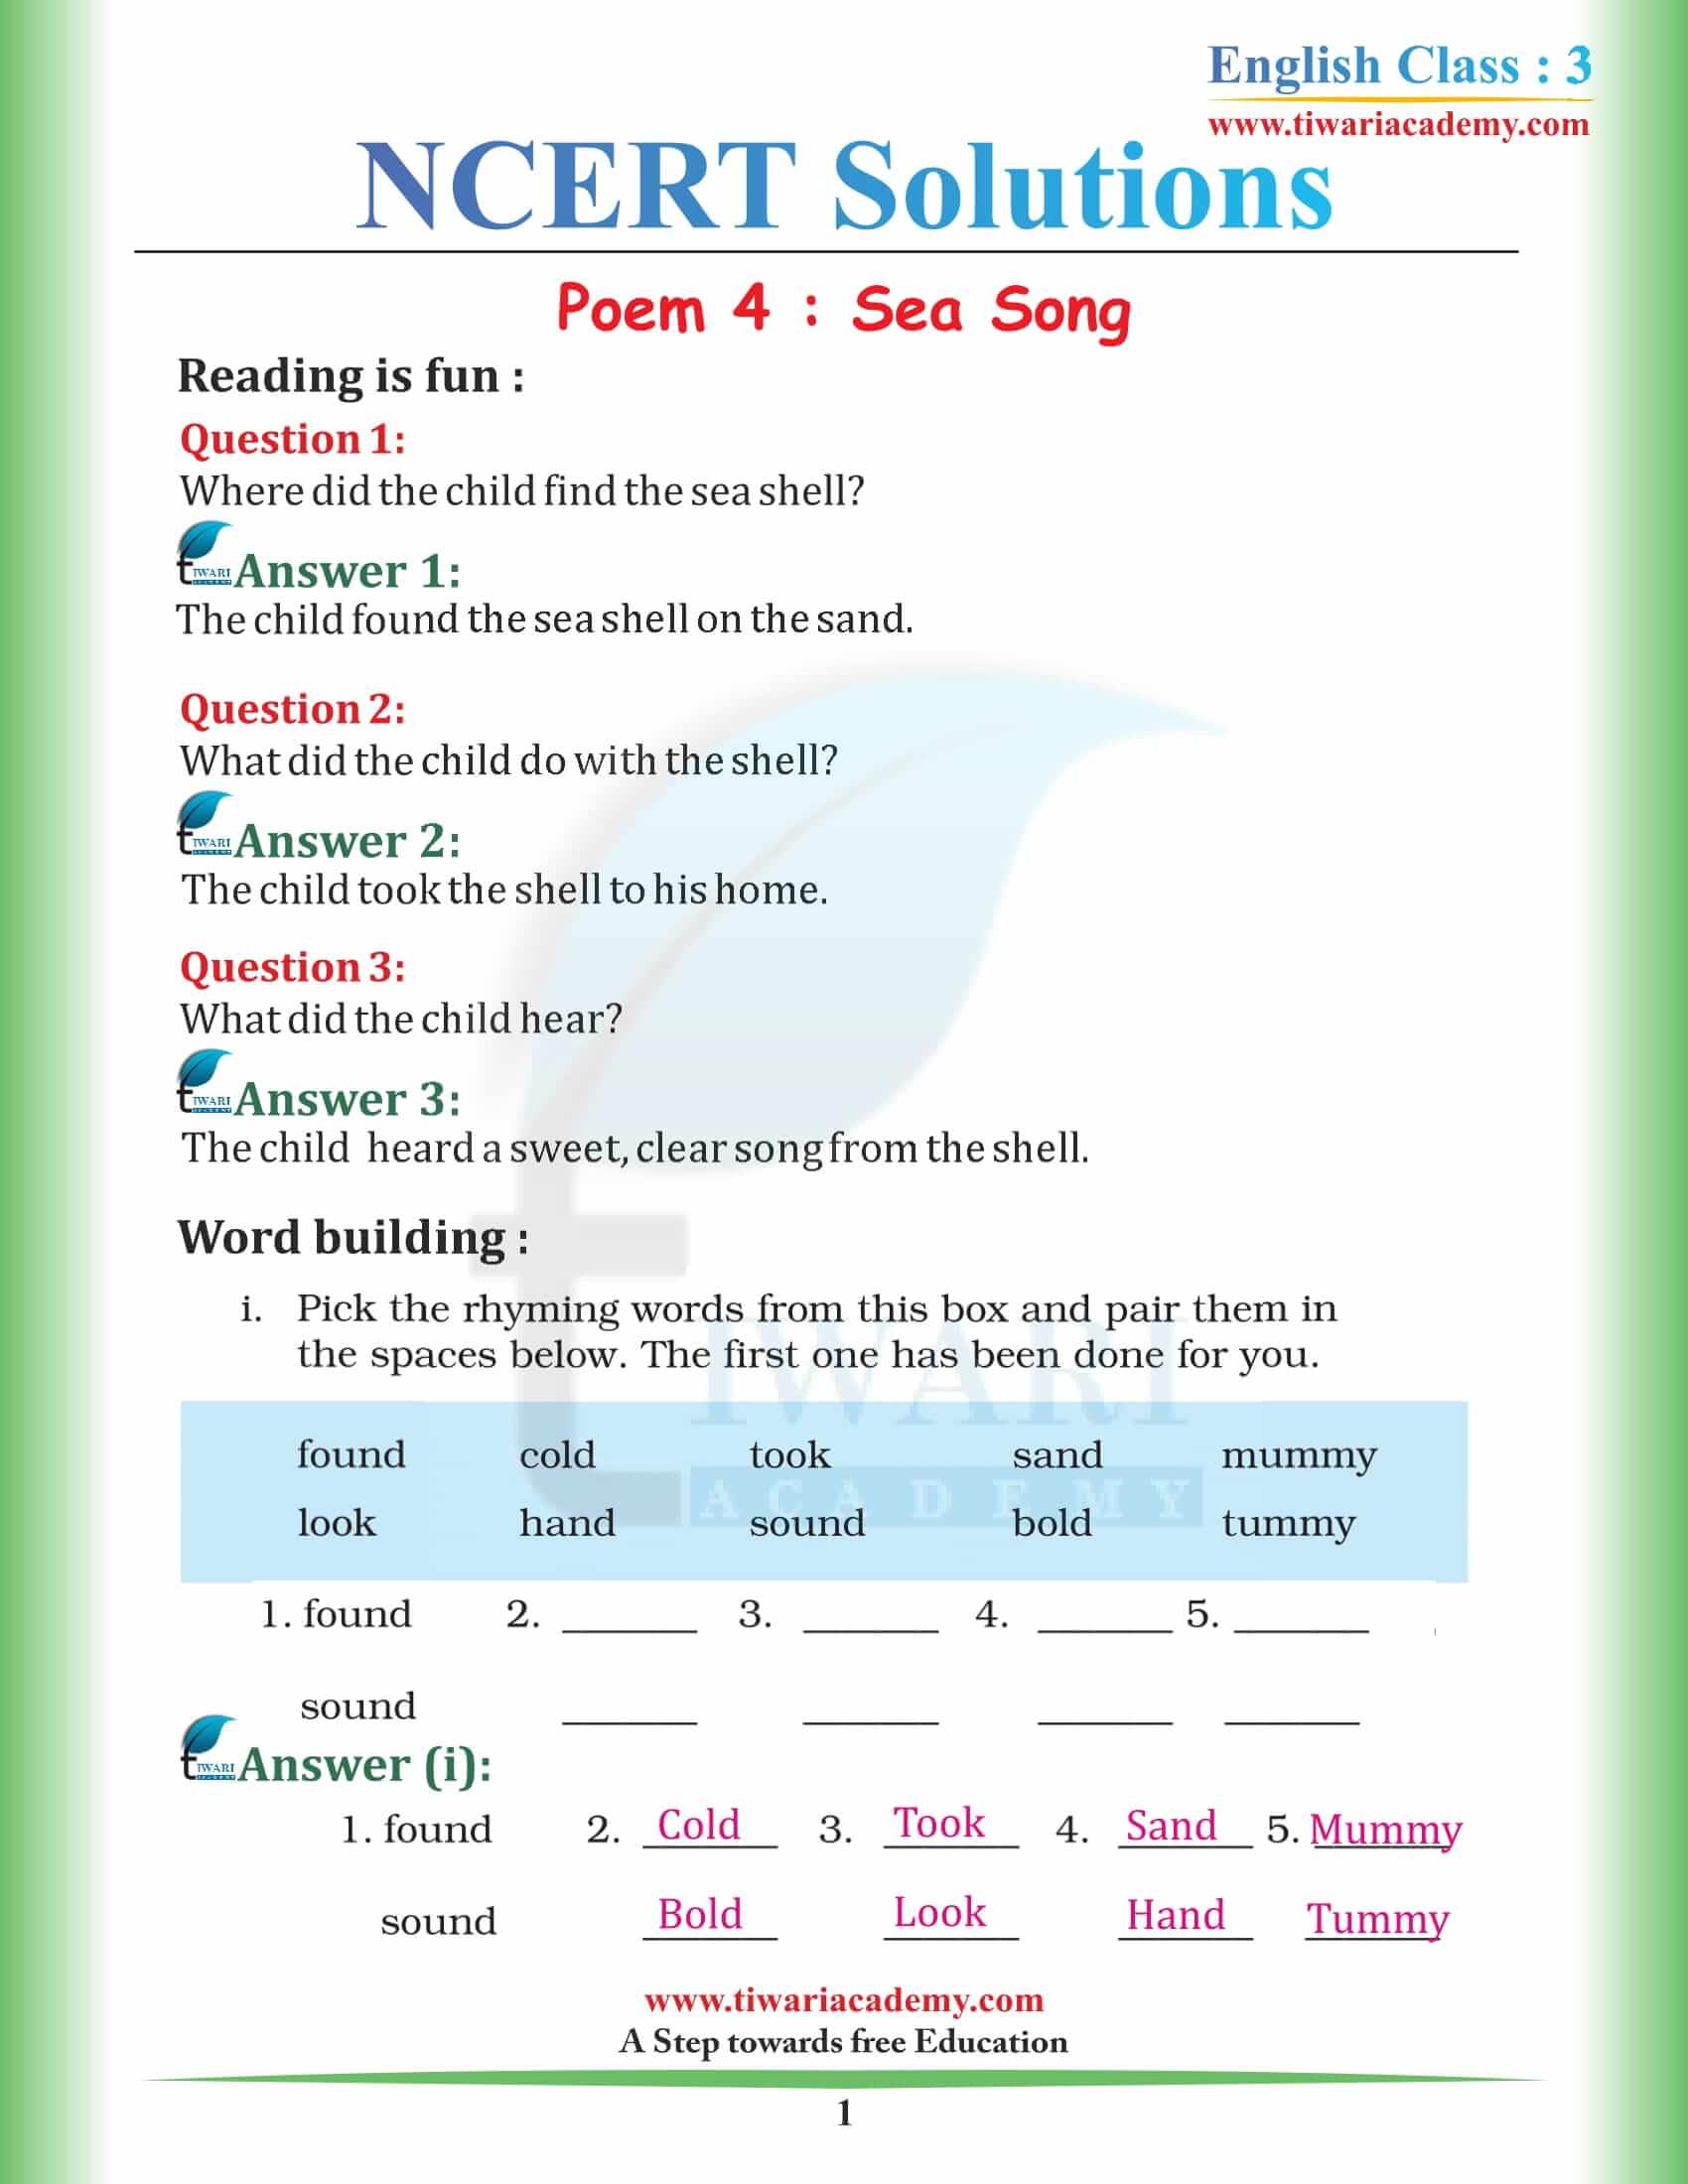 NCERT Solutions for Class 3 English Marigold 3 Unit 4 Chapter Sea Song